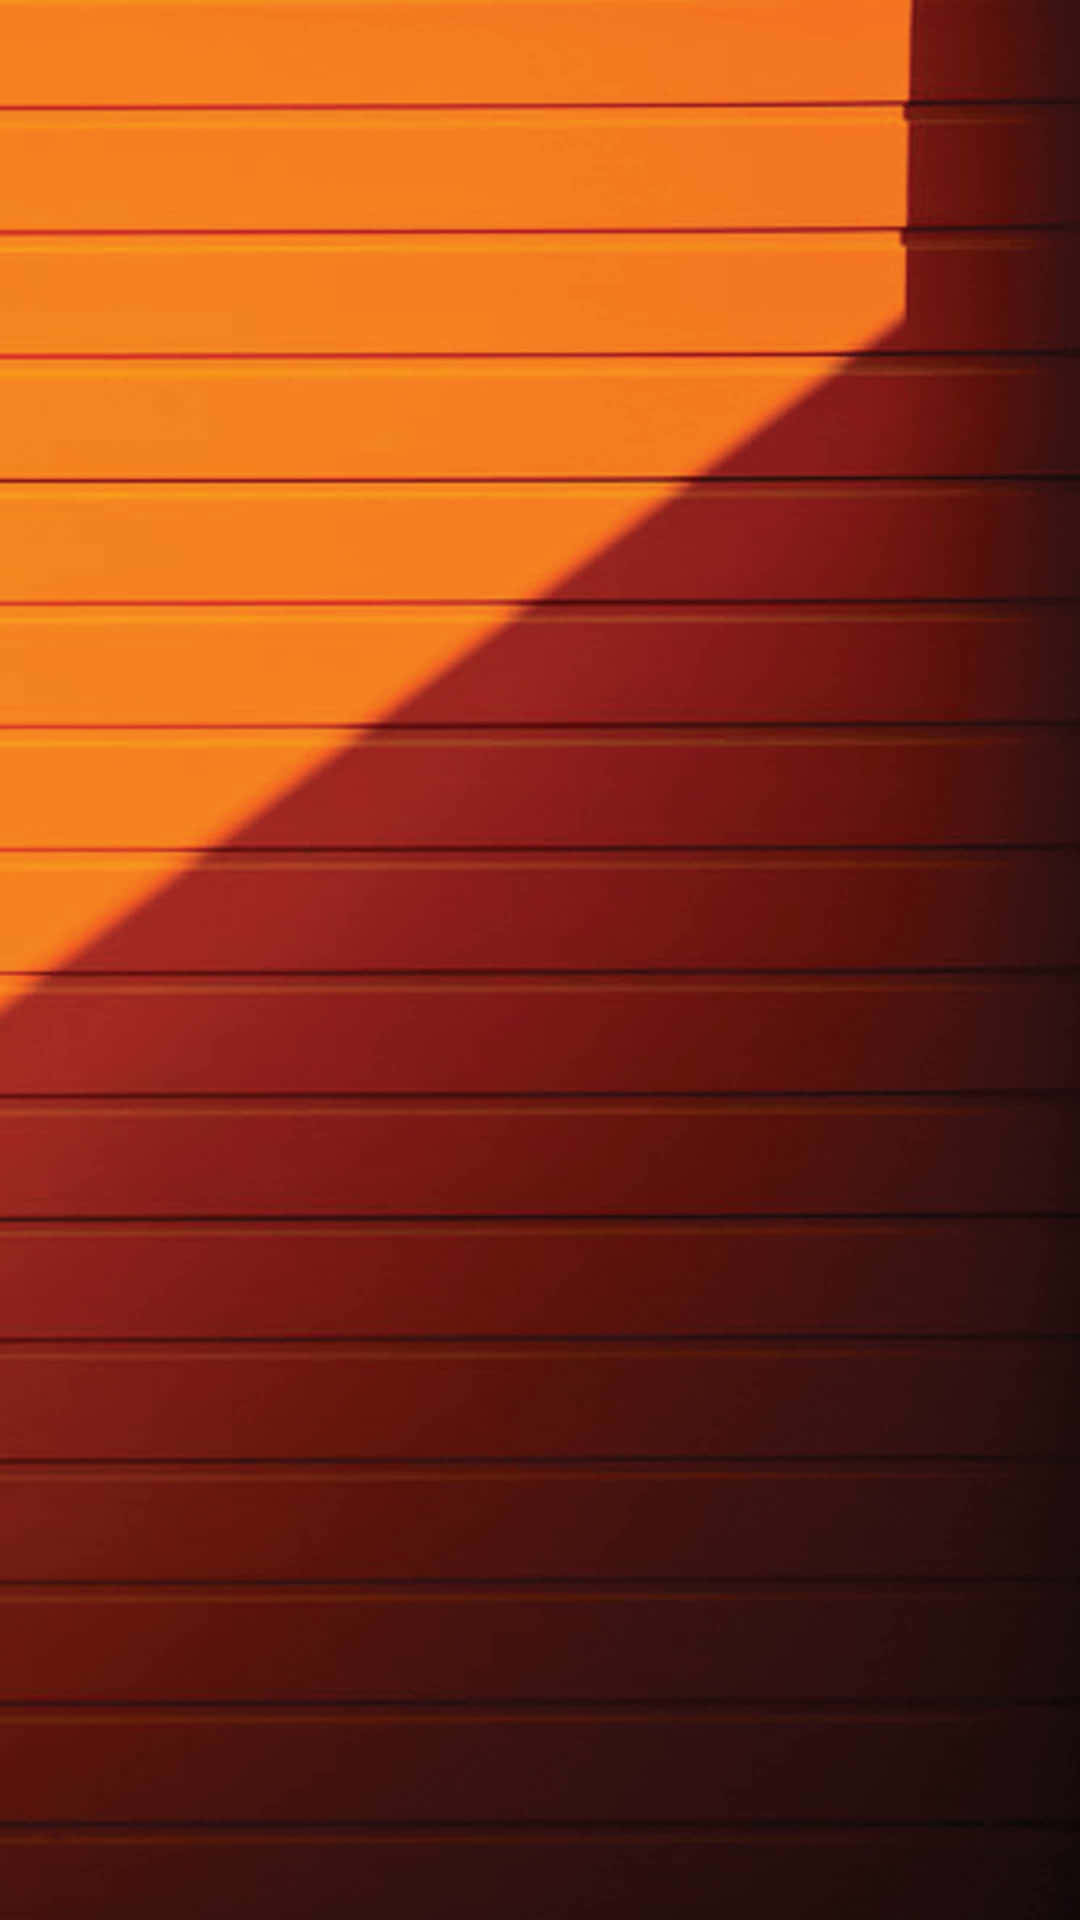 cool orange backgrounds for iphone